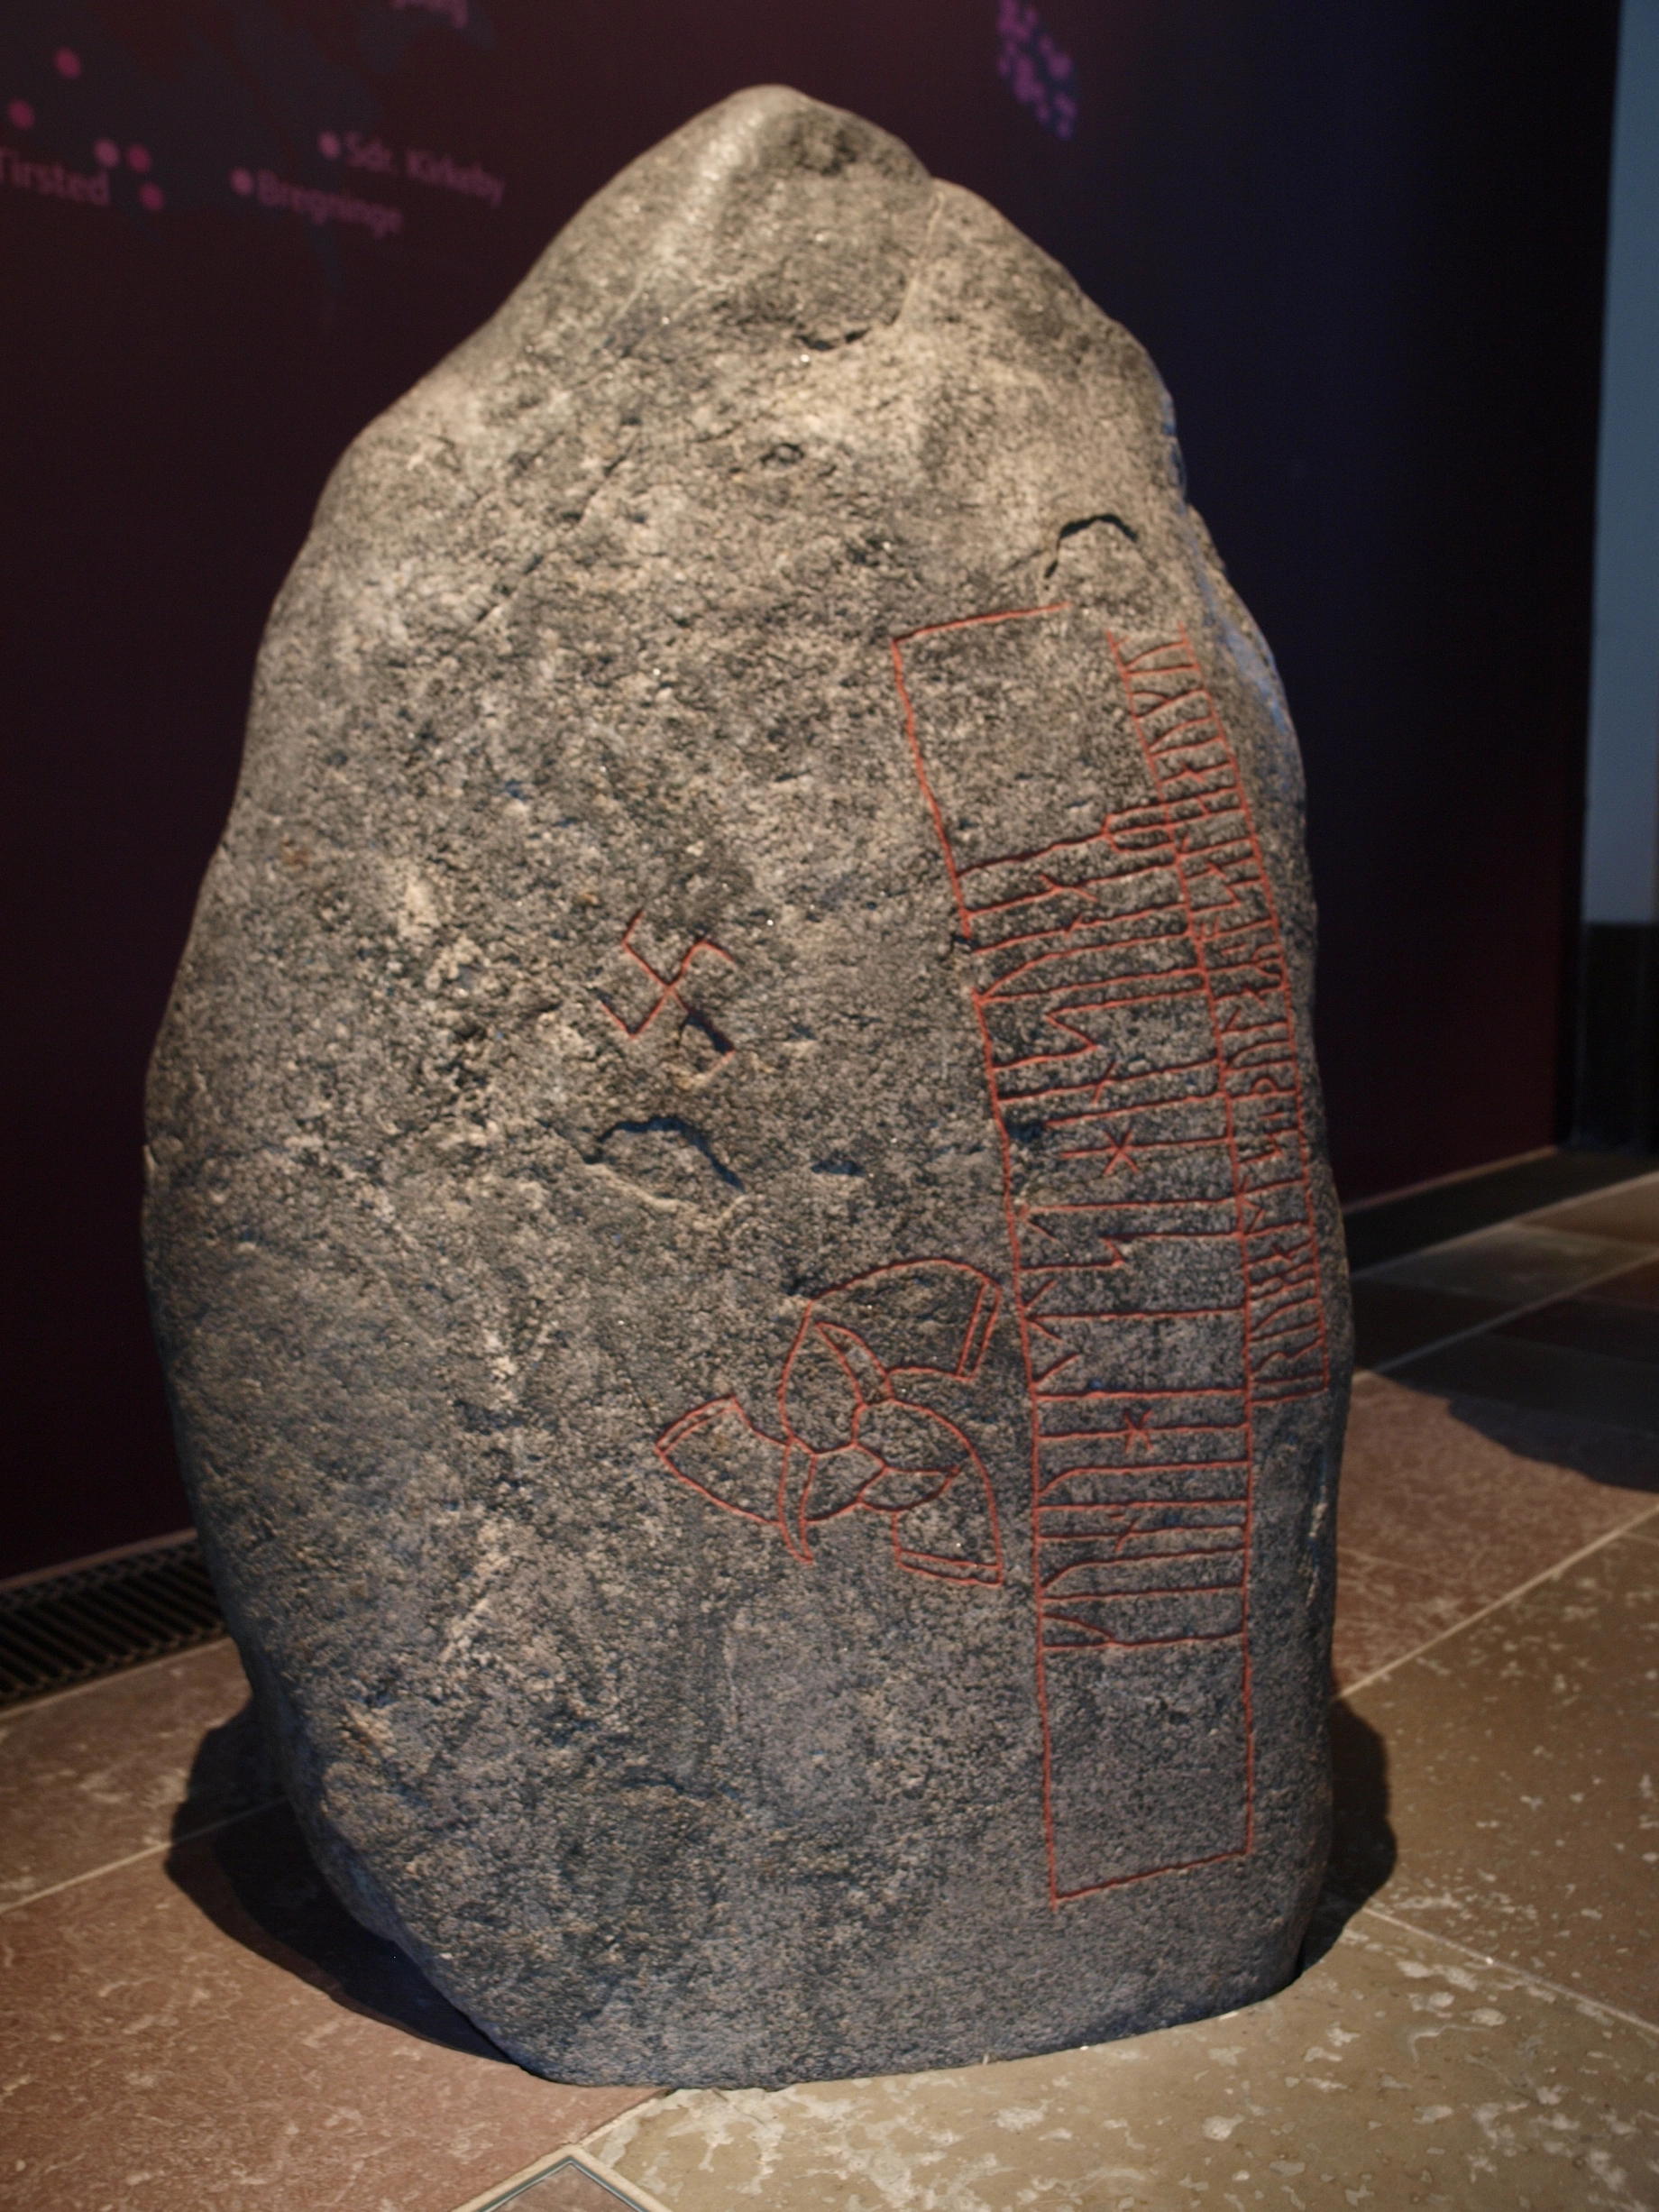 Rune stone discovered in Snoldelev, Denmark, in 1810, currently at the National Museum of Denmark in Copenhagen.